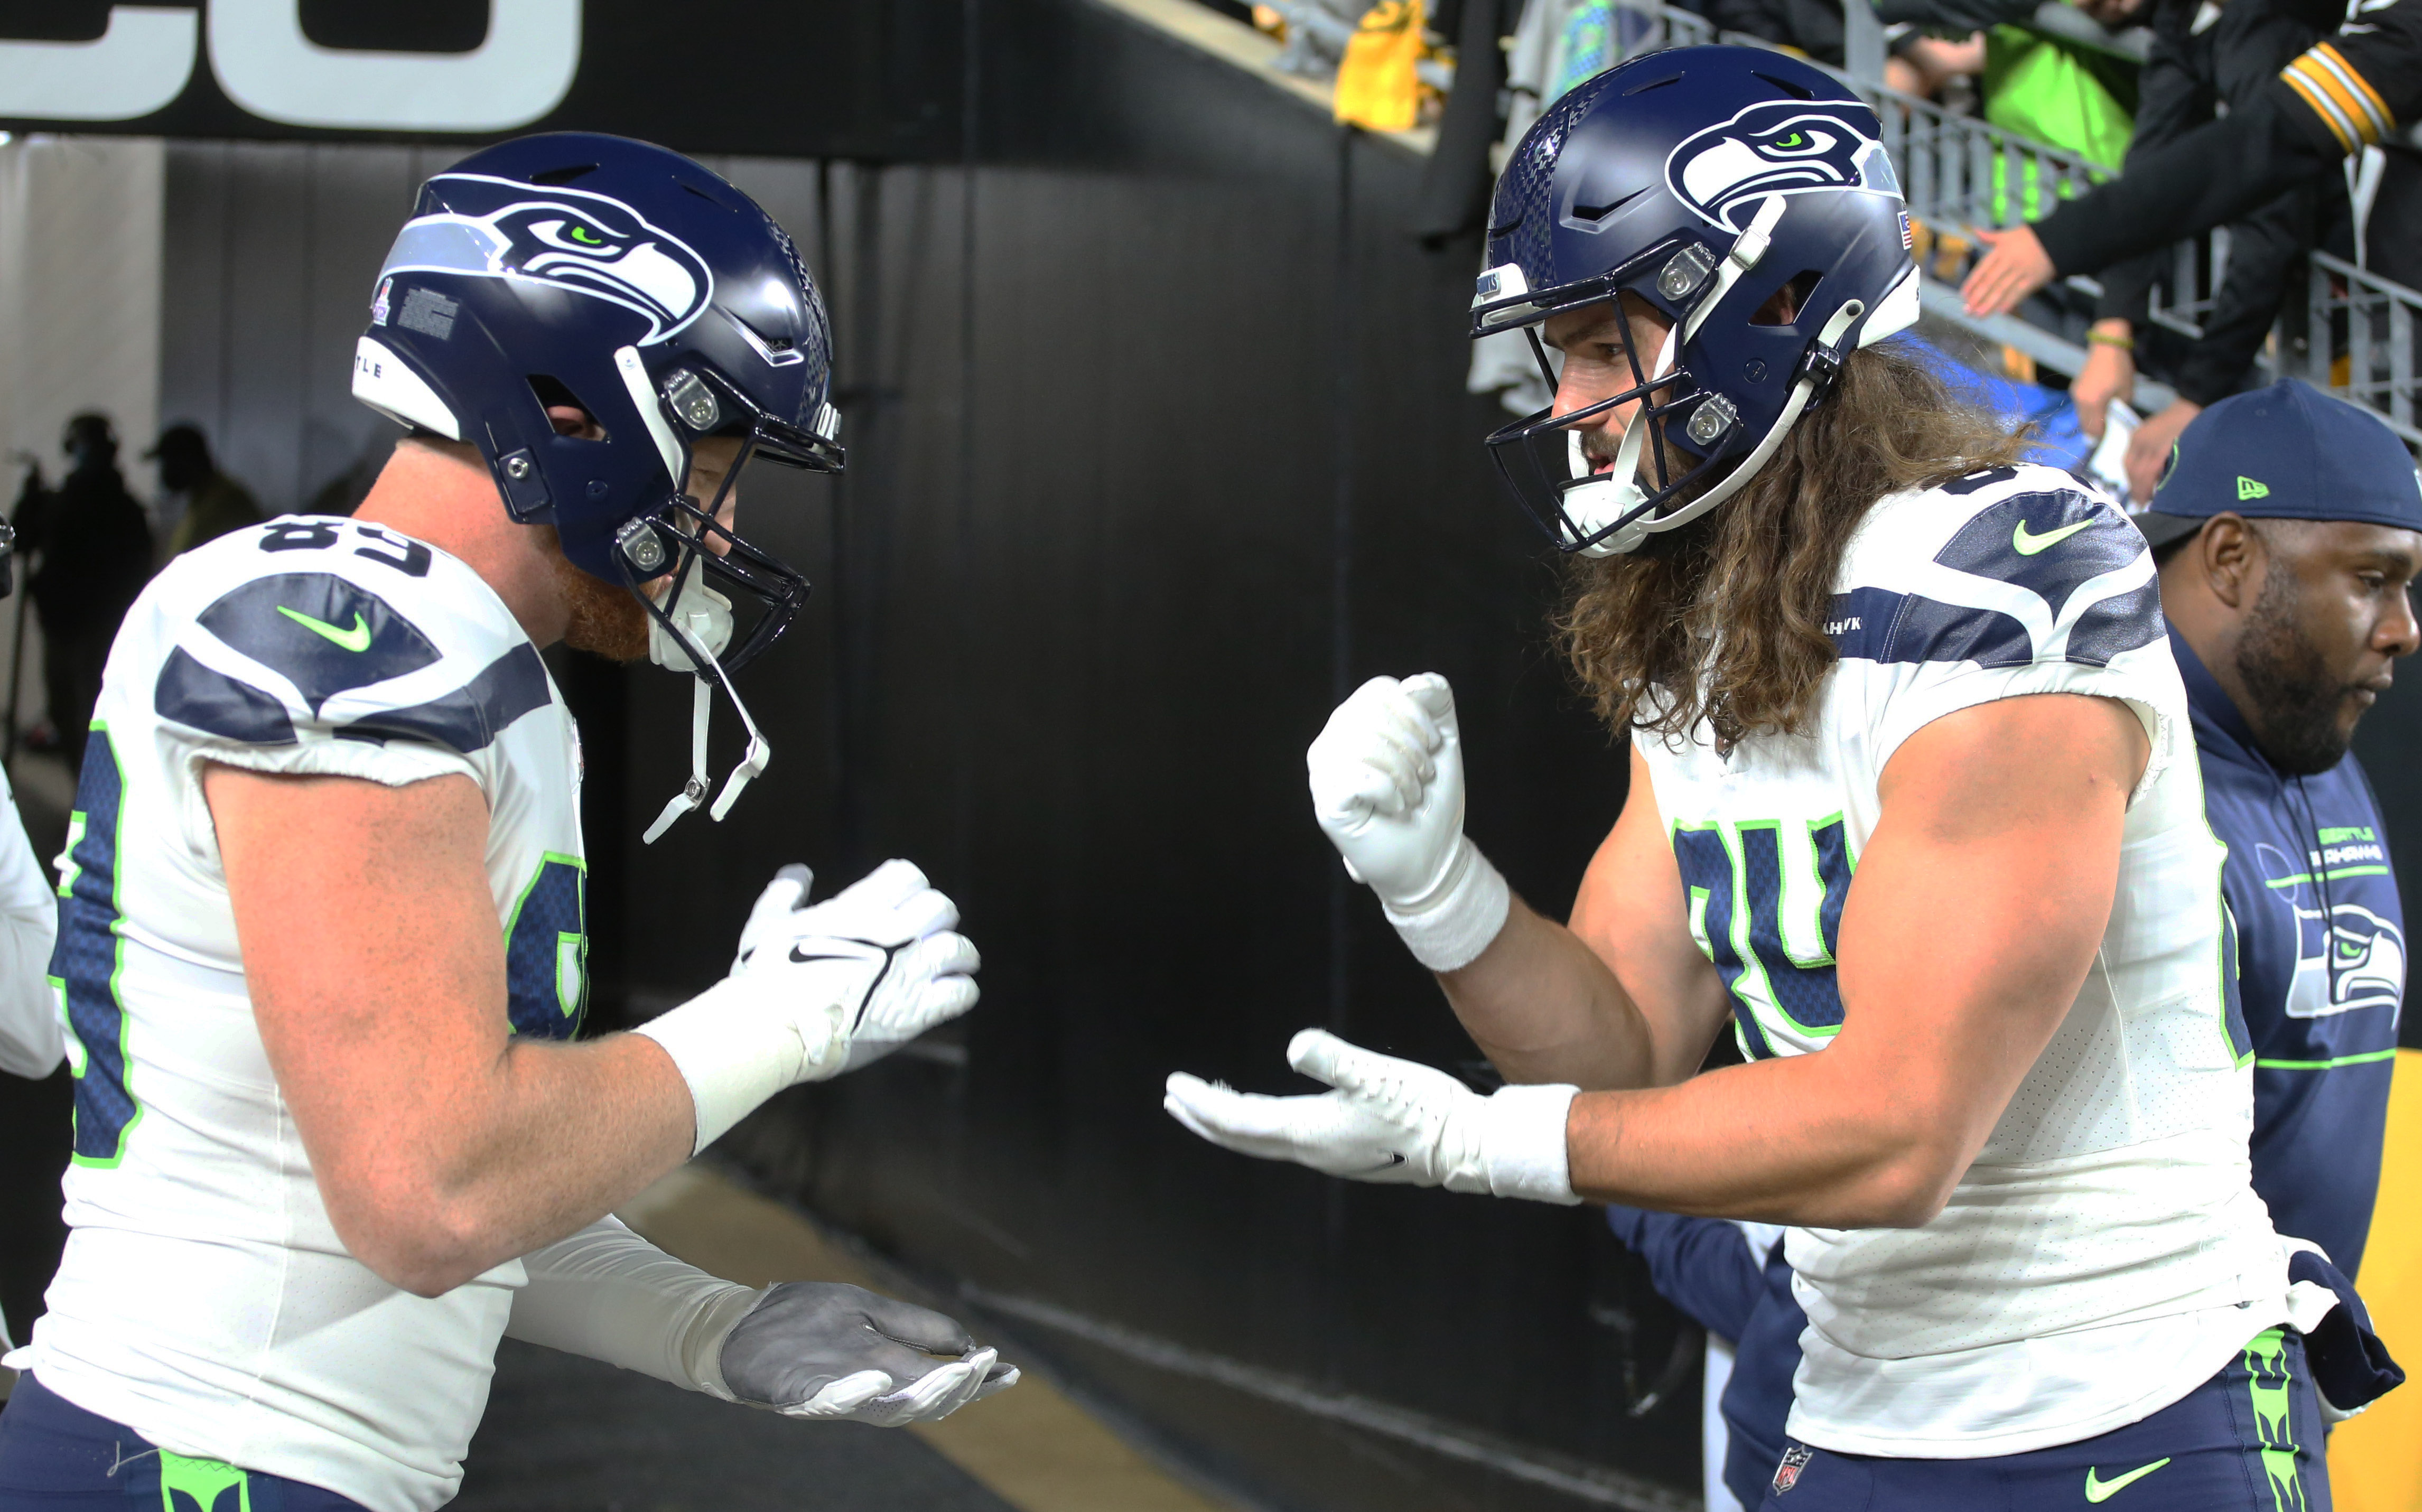 NFL: Seattle Seahawks at Pittsburgh Steelers Oct 17, 2021; Pittsburgh, Pennsylvania, USA; Seattle Seahawks tight ends Will Dissly (89) and Colby Parkinson (84) play rock paper scissors as part of their pre-game routine before the game against the Pittsburgh Steelers at Heinz Field.